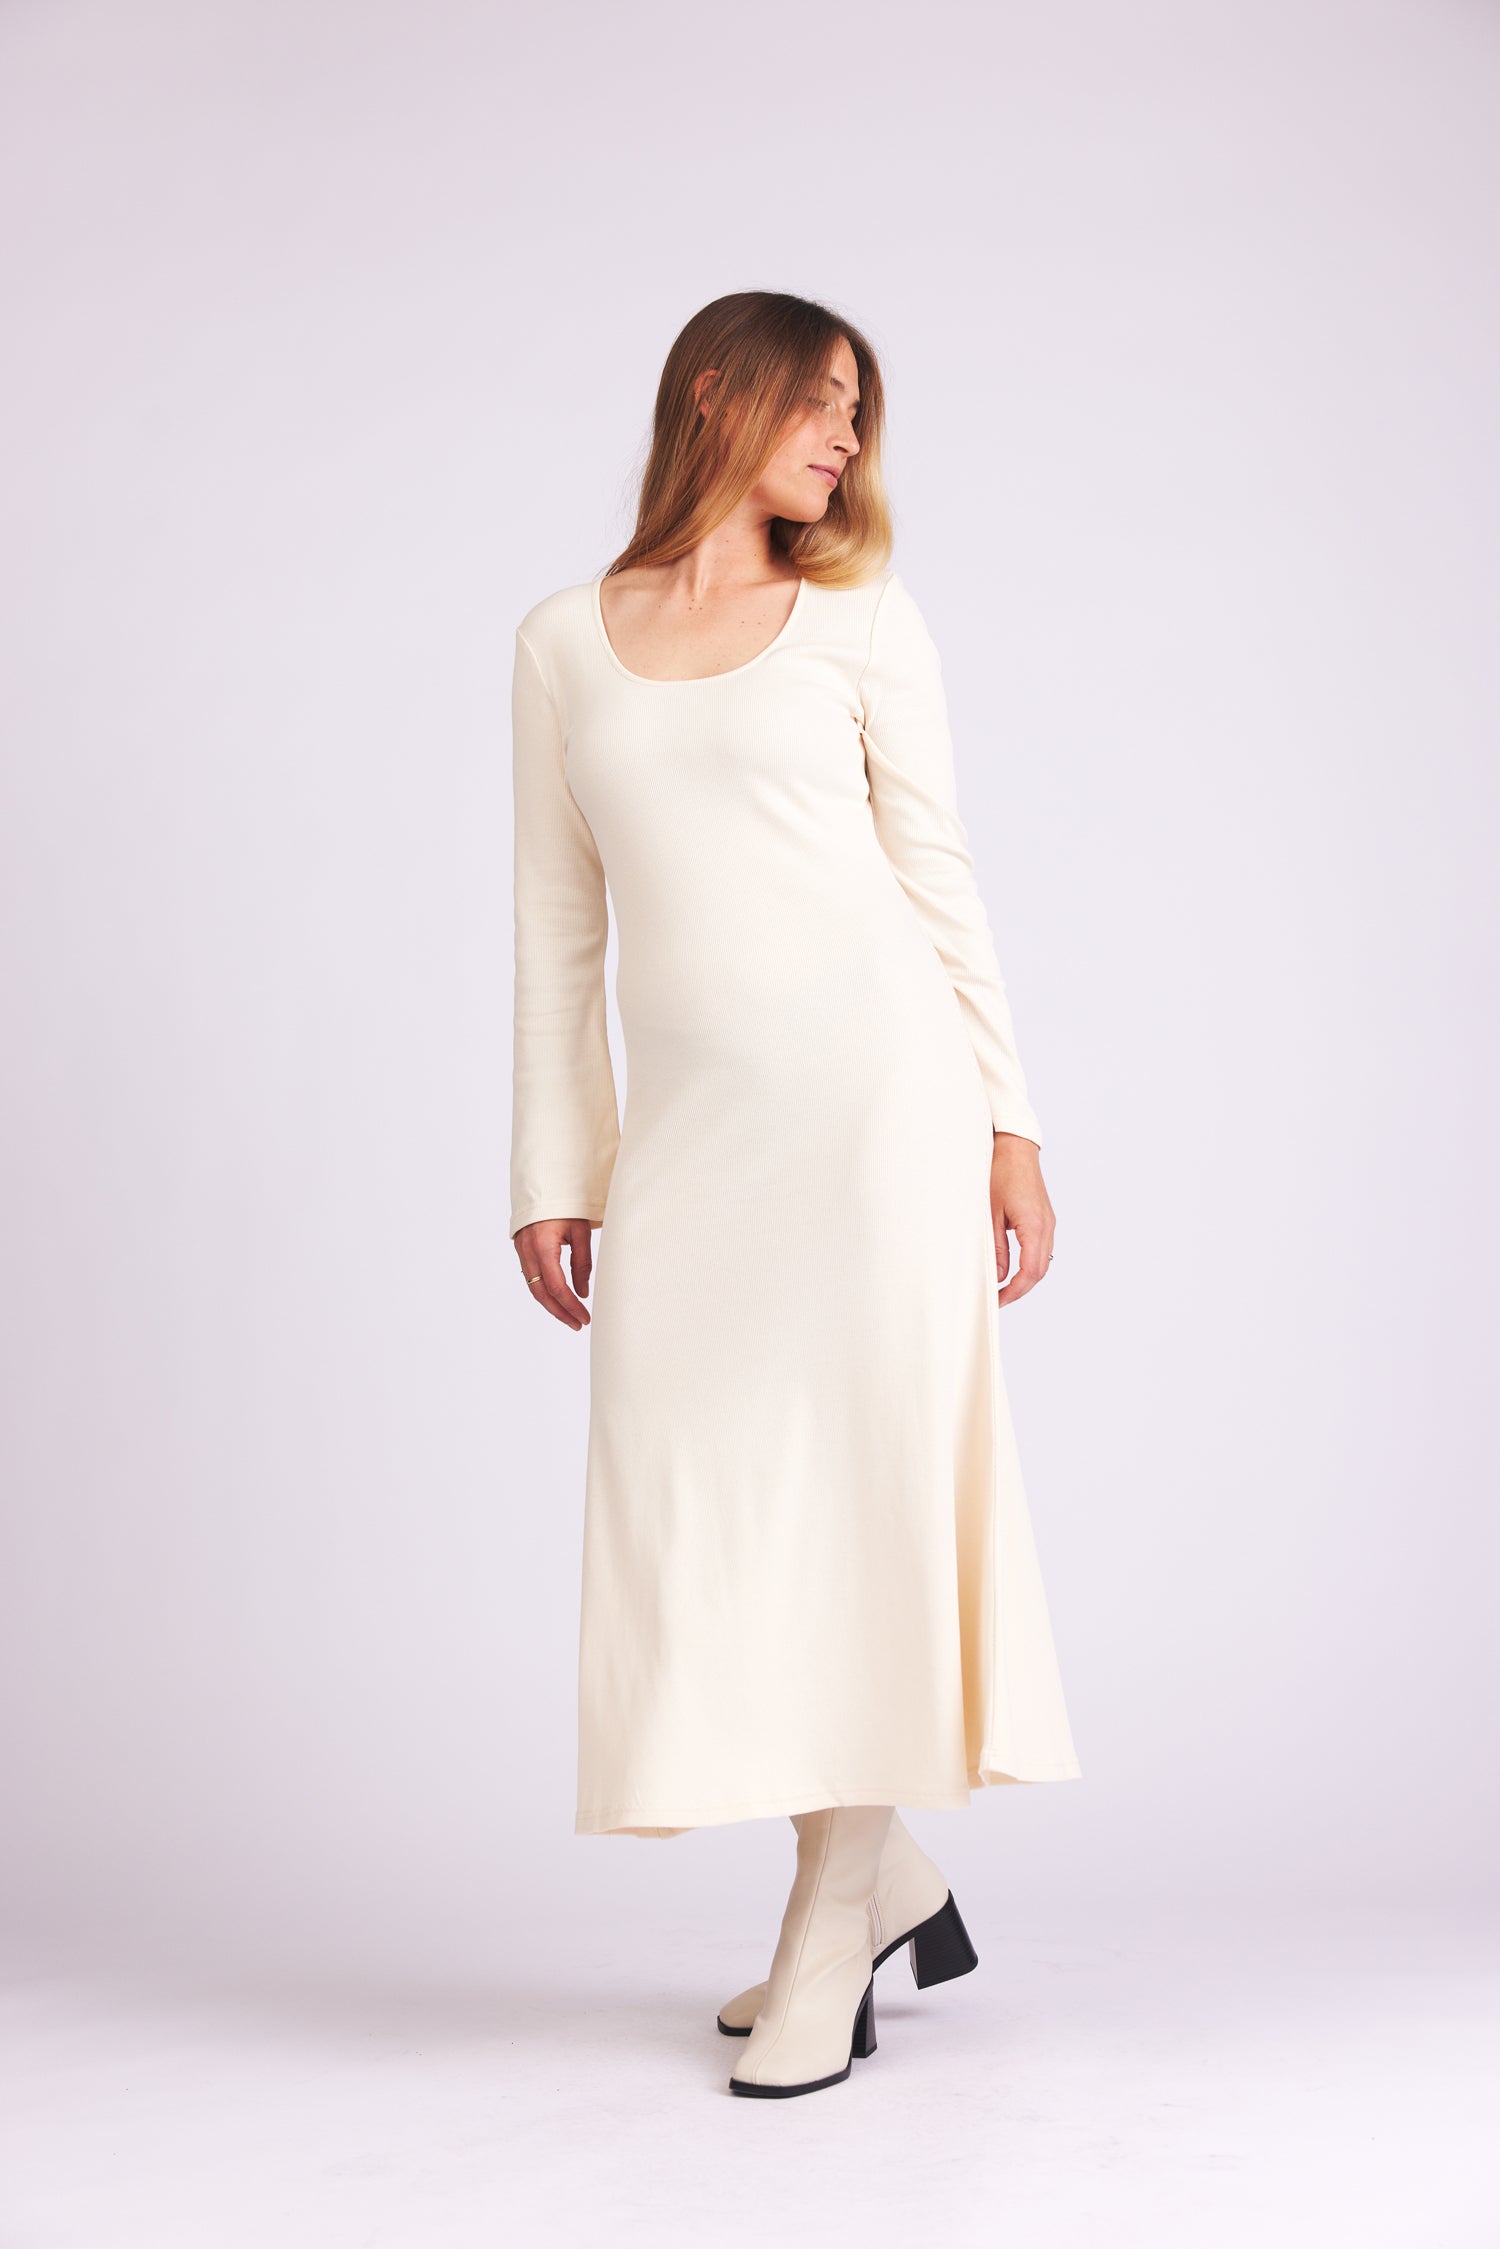 White, long dress Birdie made of organic cotton by Baige the Label